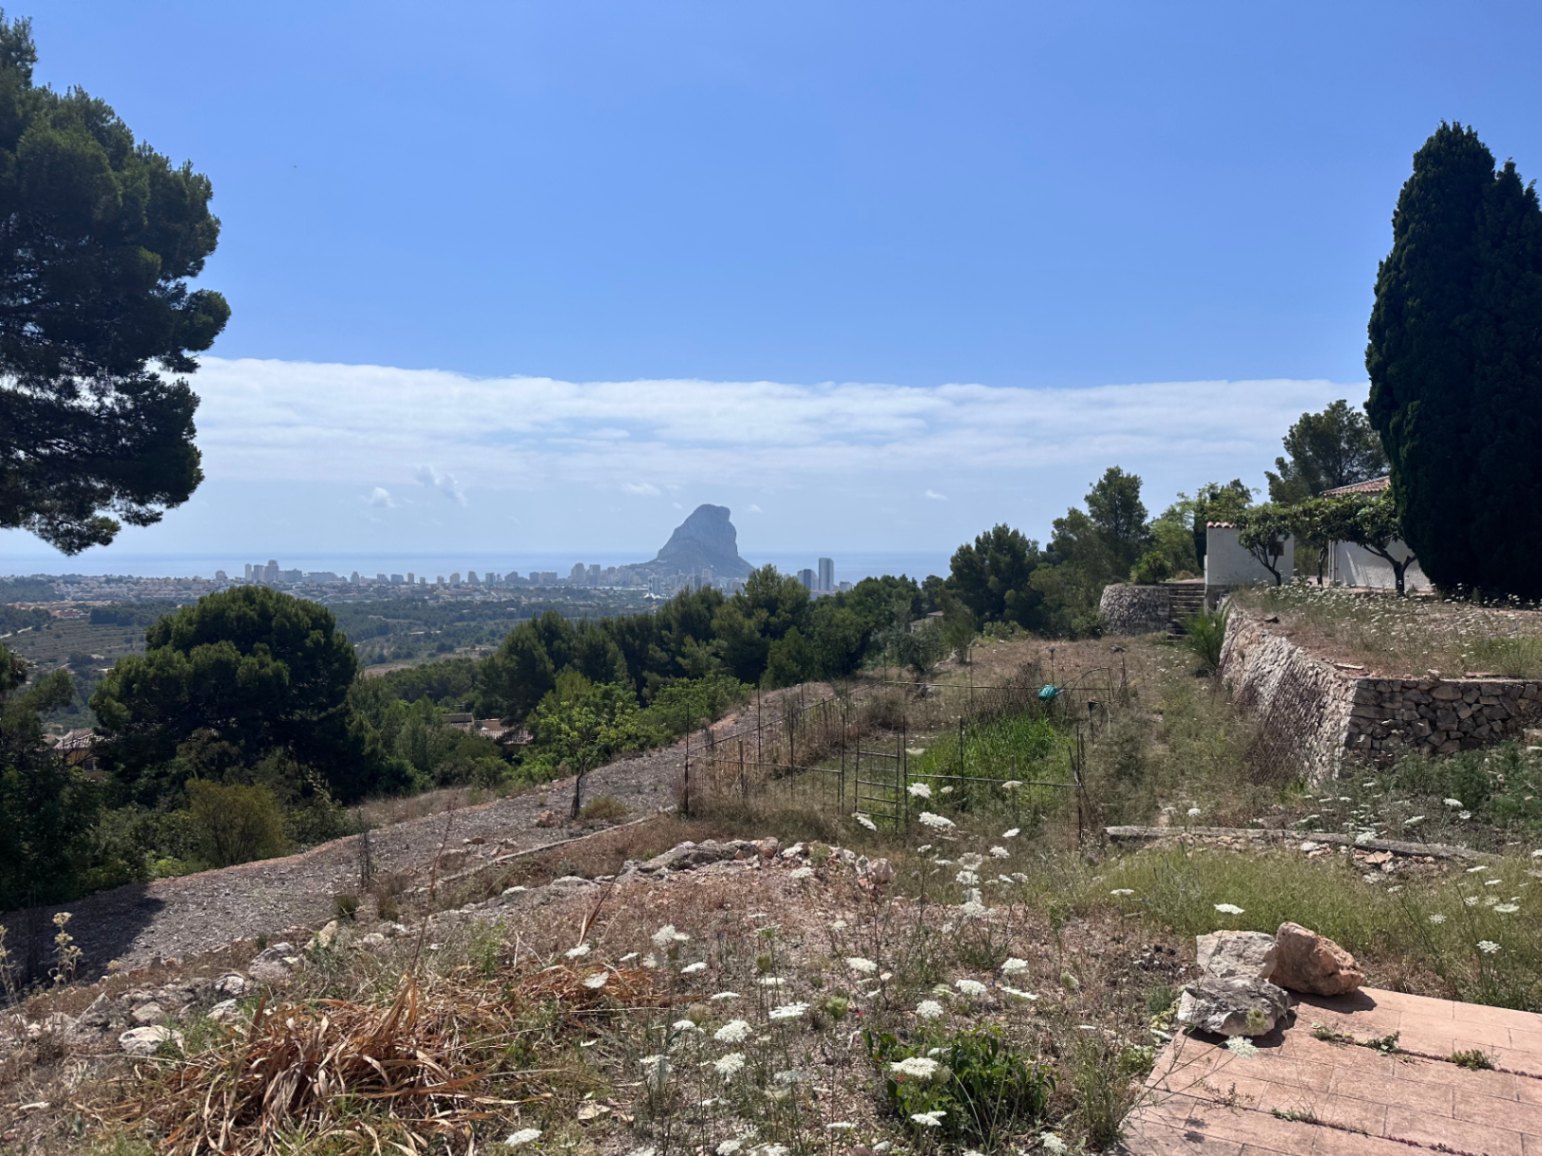 RUSTIC FINCA WITH BEAUTIFUL VIEWS OF THE BAY OF CALPE